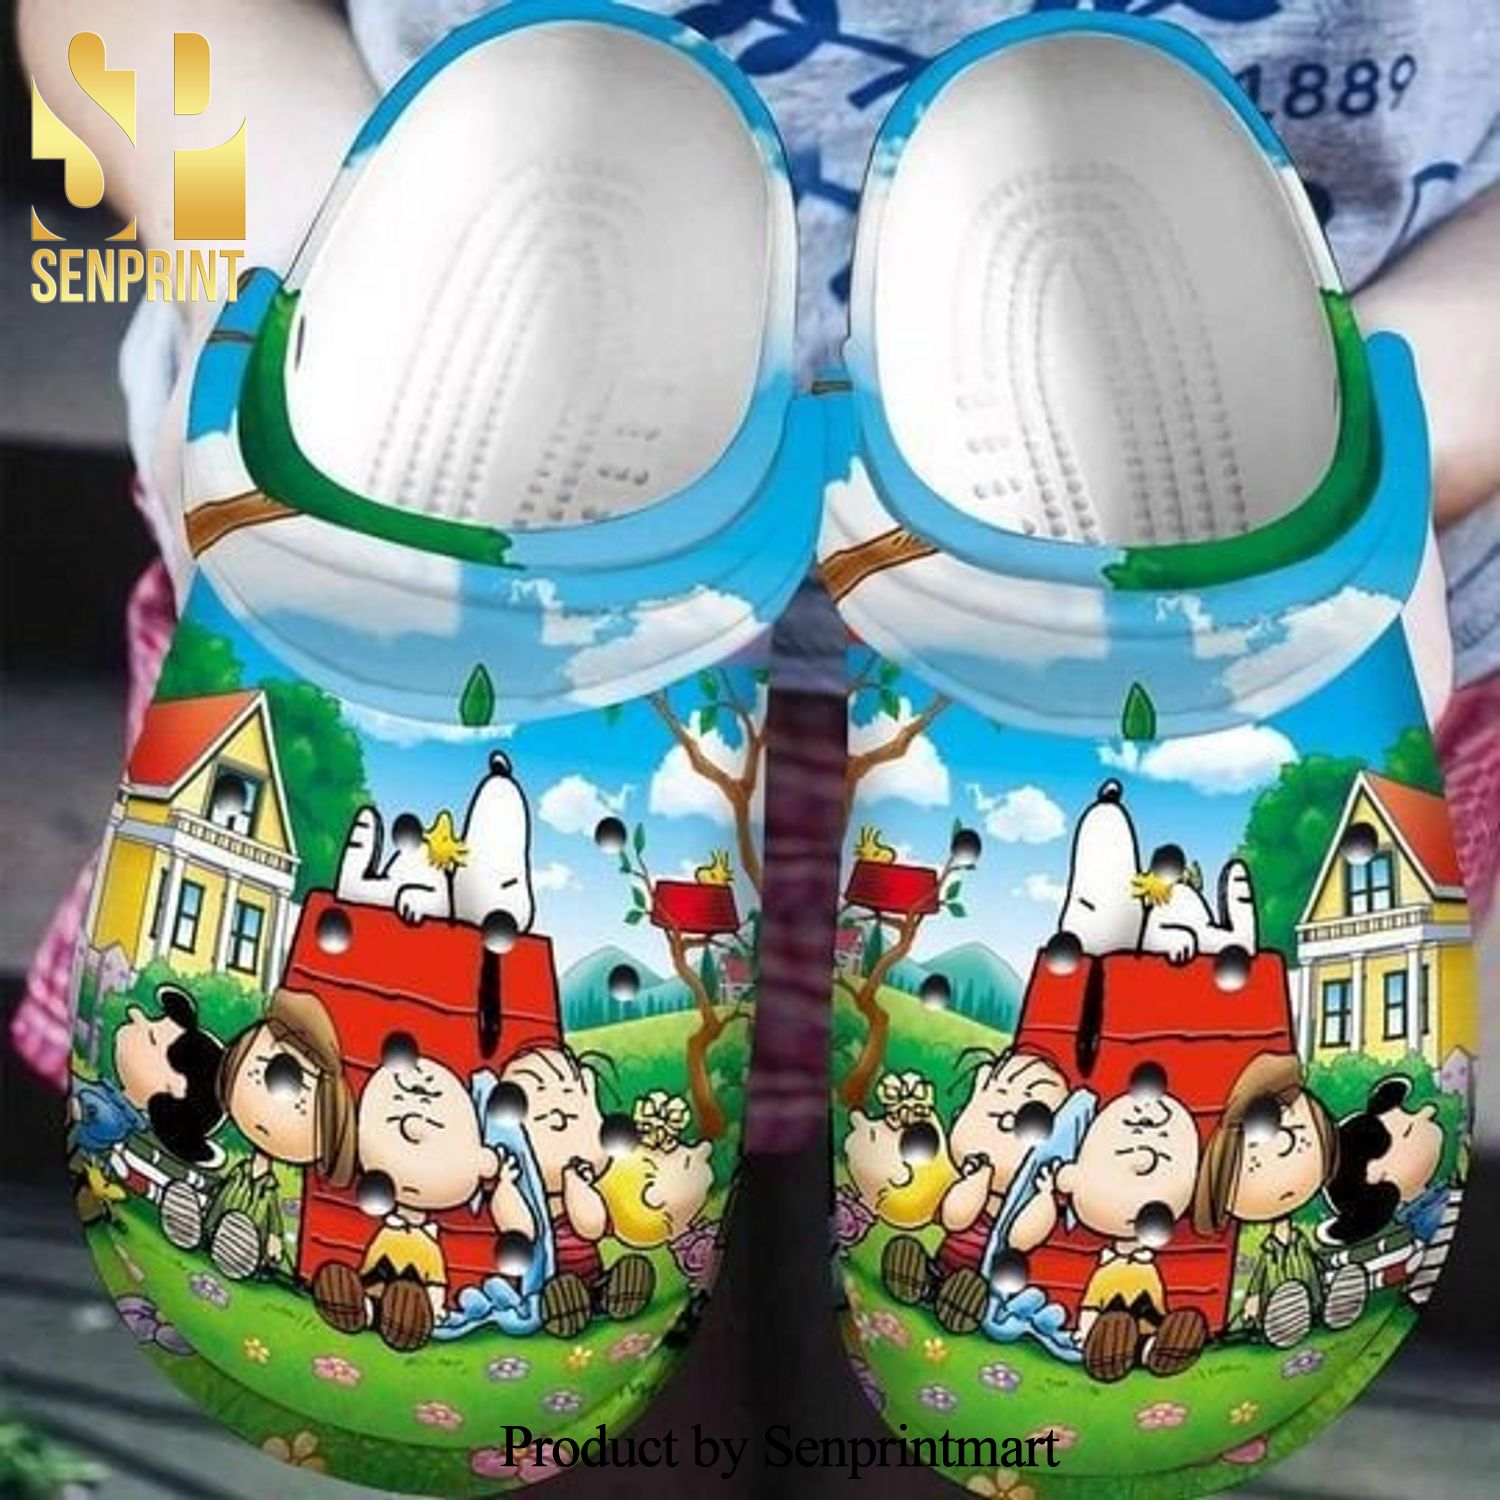 Snoopy Dog And Charlie Brown With Friends Full Printing Crocs Unisex Crocband Clogs